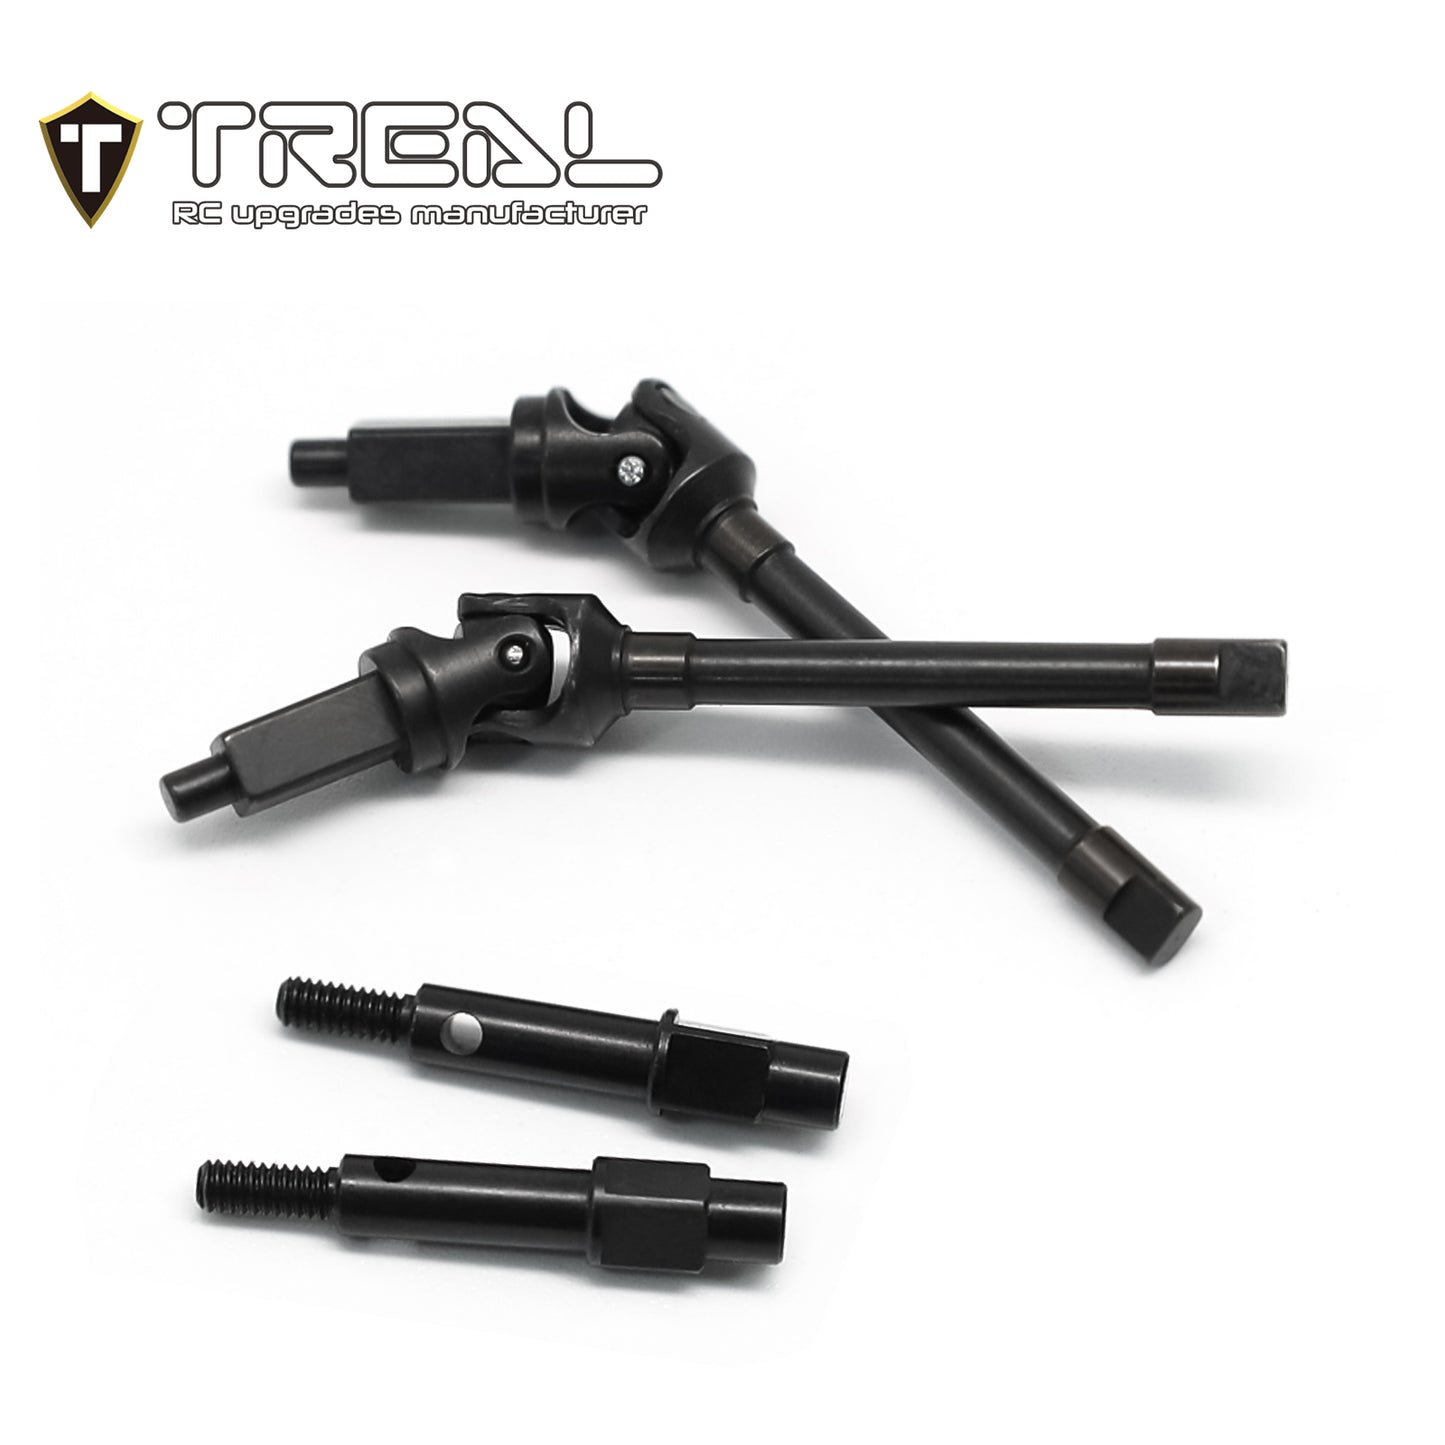 TREAL Steel Front CVD Shafts (2pcs) for SCX24 Front Portal Axles